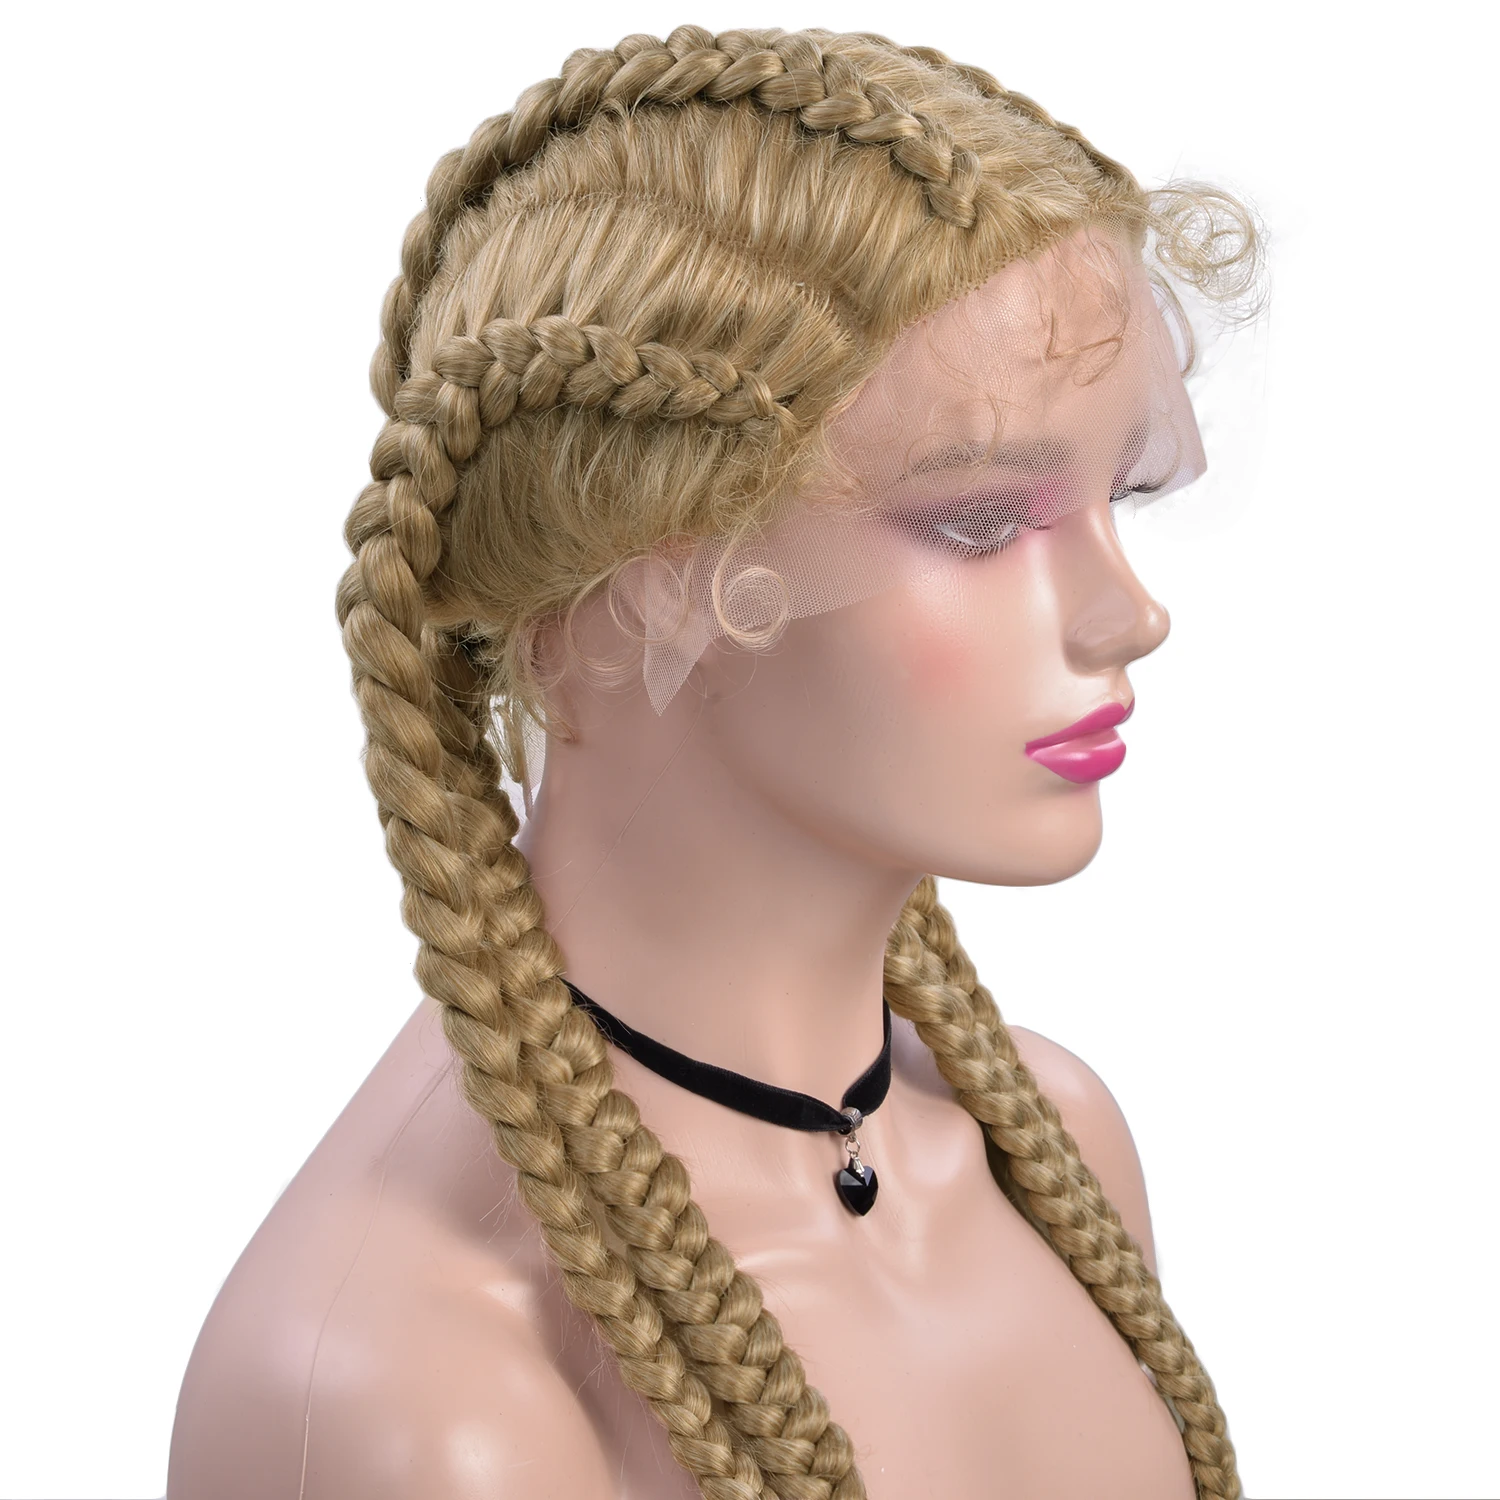 Chorliss Synthetic 36 Inch Cornrow Braids Wigs With Baby Hair Double Dutch Braid Lace Front Wig For Women Wholesale Afro Wig